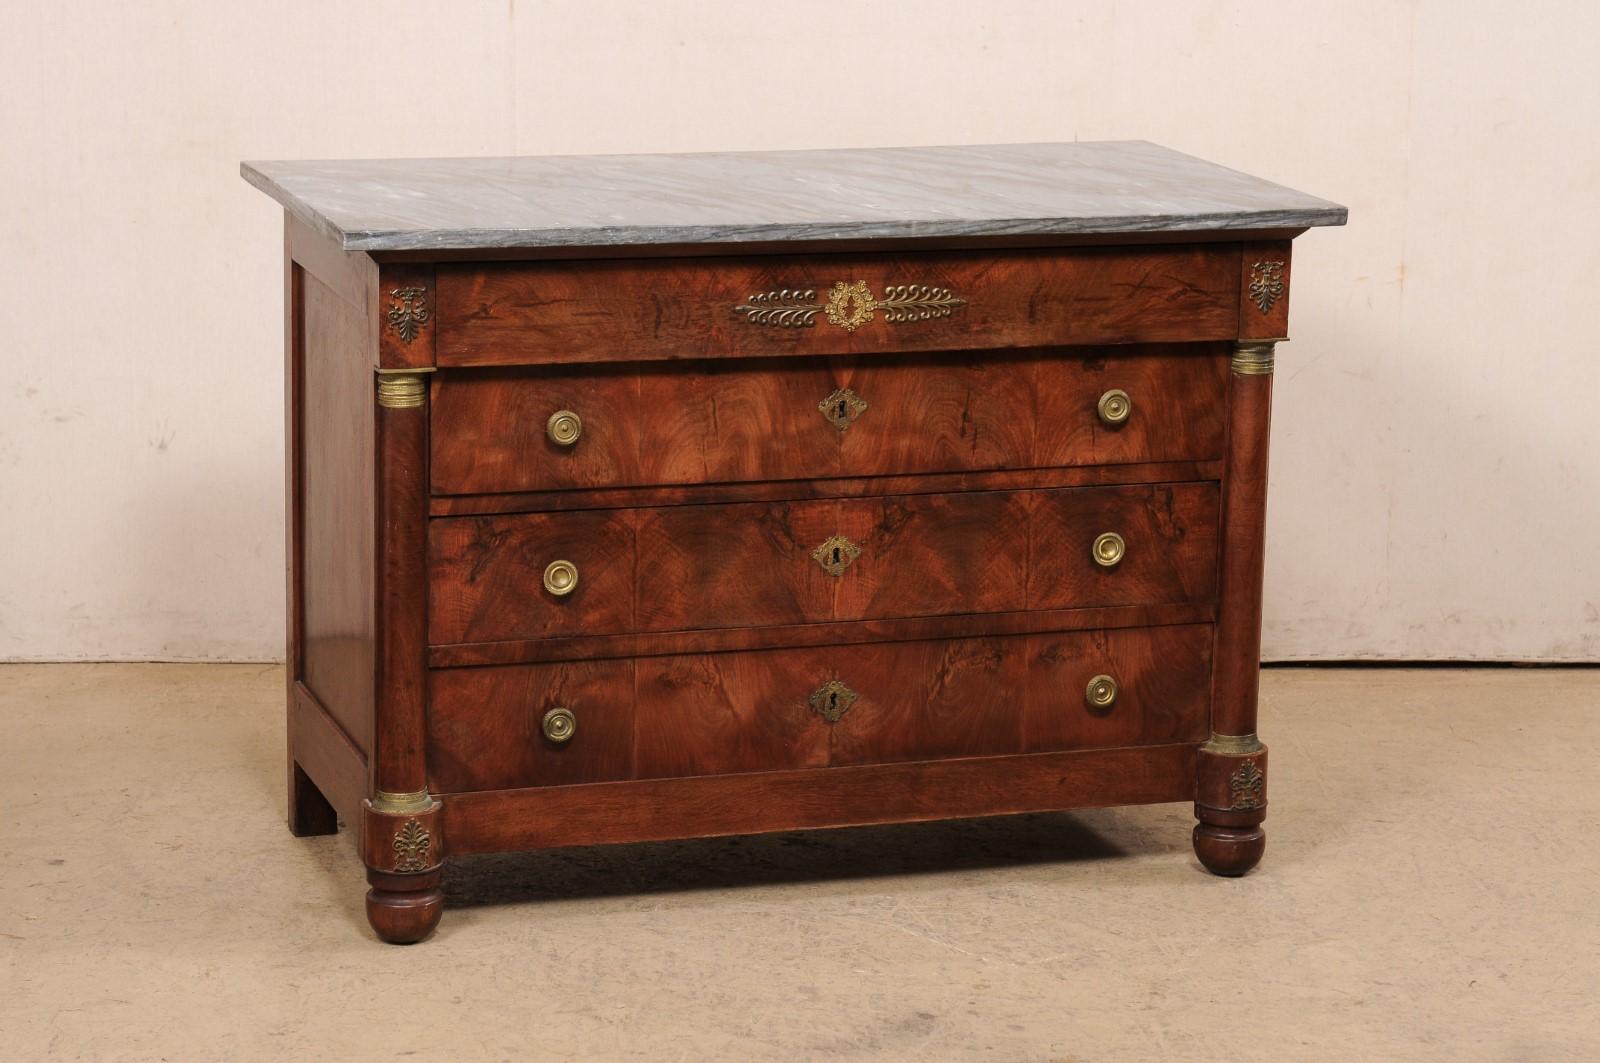 A French Neoclassical commode, with marble top and exquisite brass accents, from the 19th century. This antique chest from France features a rectangular-shaped gray marble top, over case which houses four drawers (upper drawer is disguised within